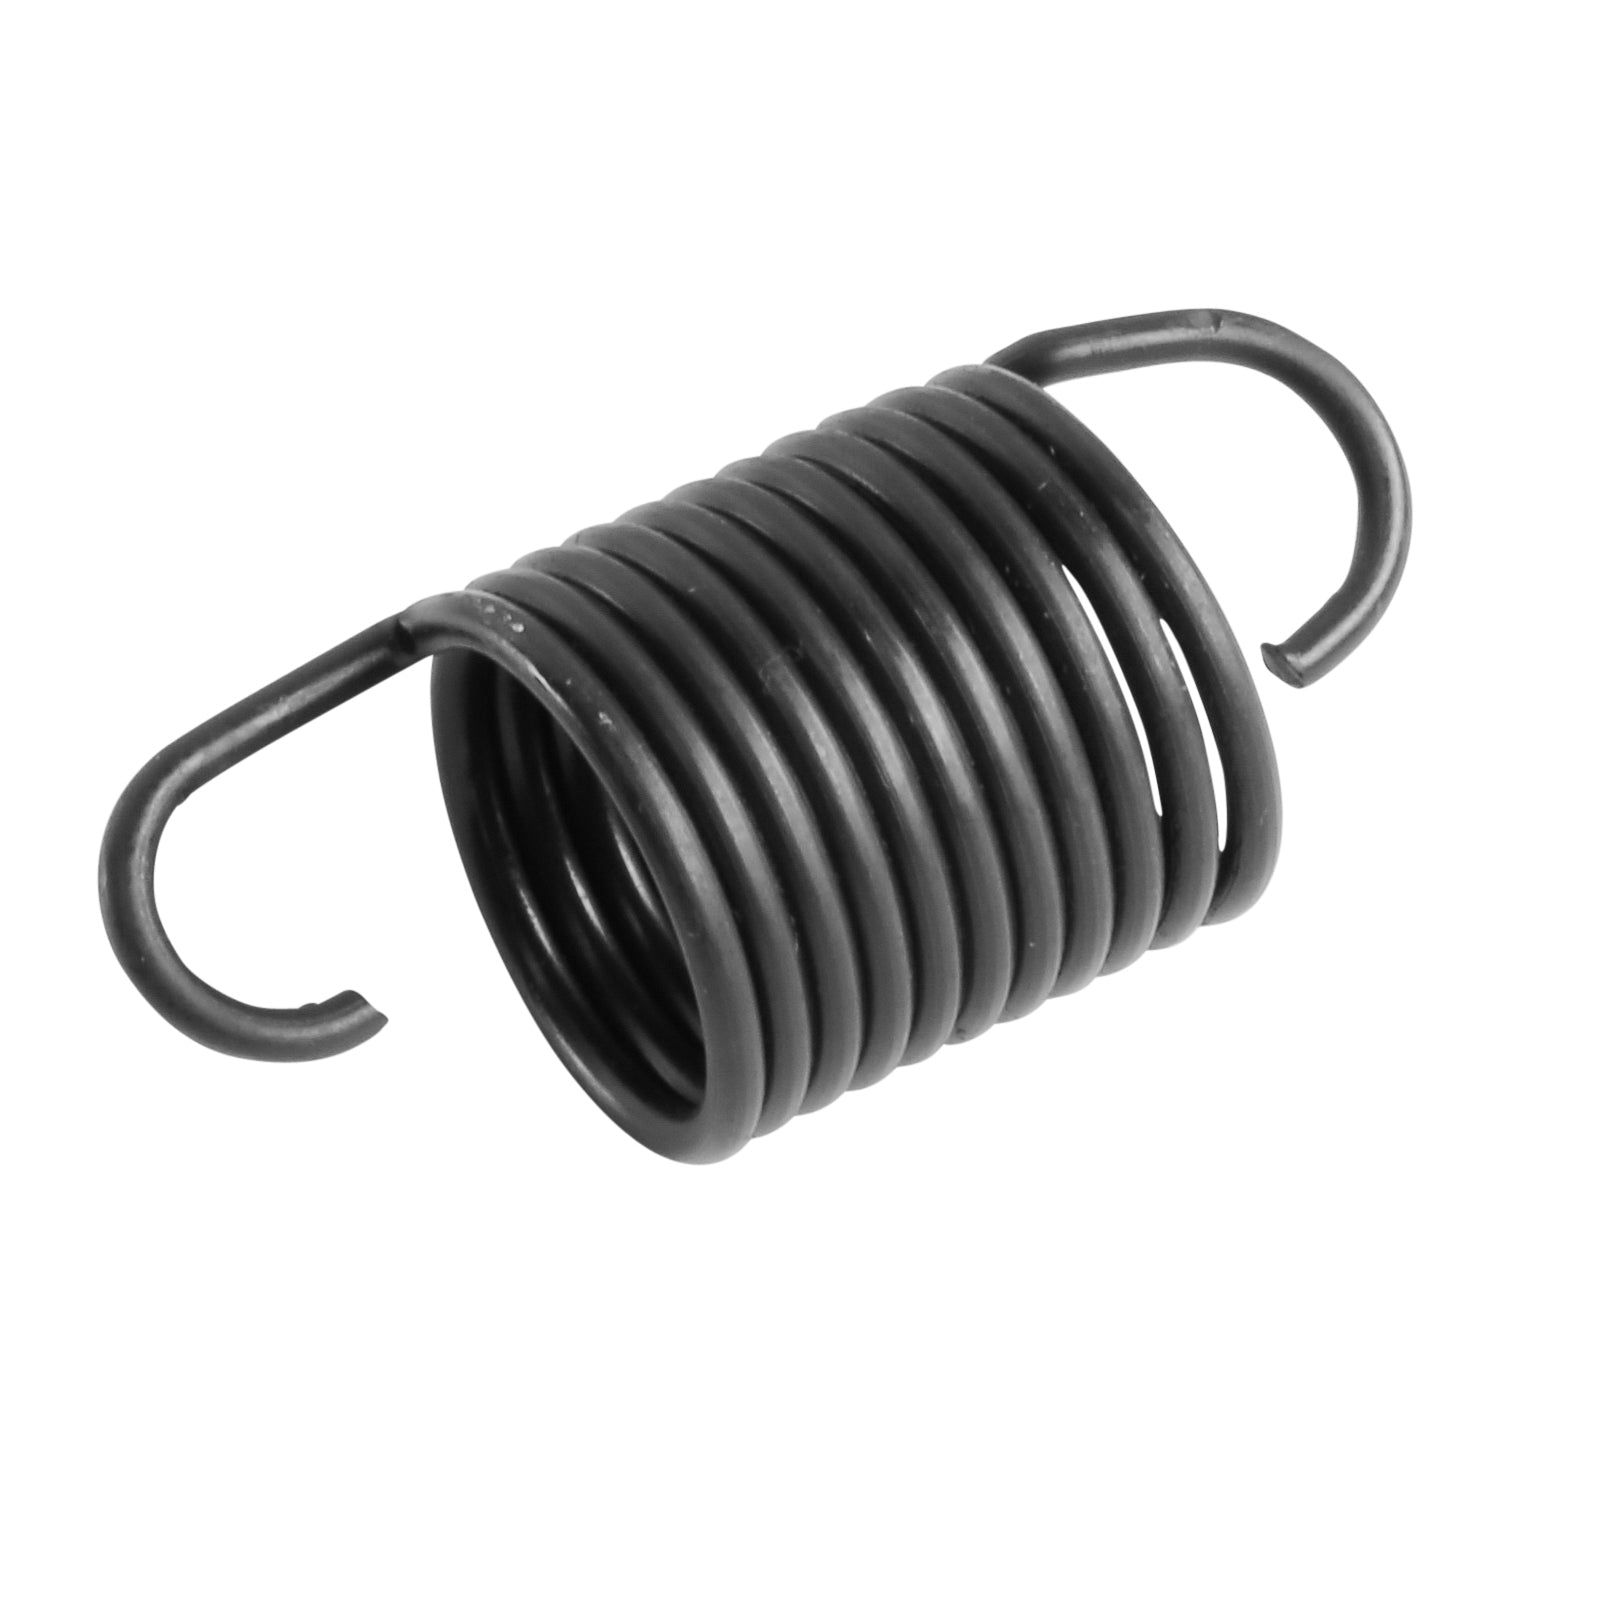 Clutch Release (Throw-out) Bearing Spring • 1935-48 Ford Passenger & 1935-47 Pickup